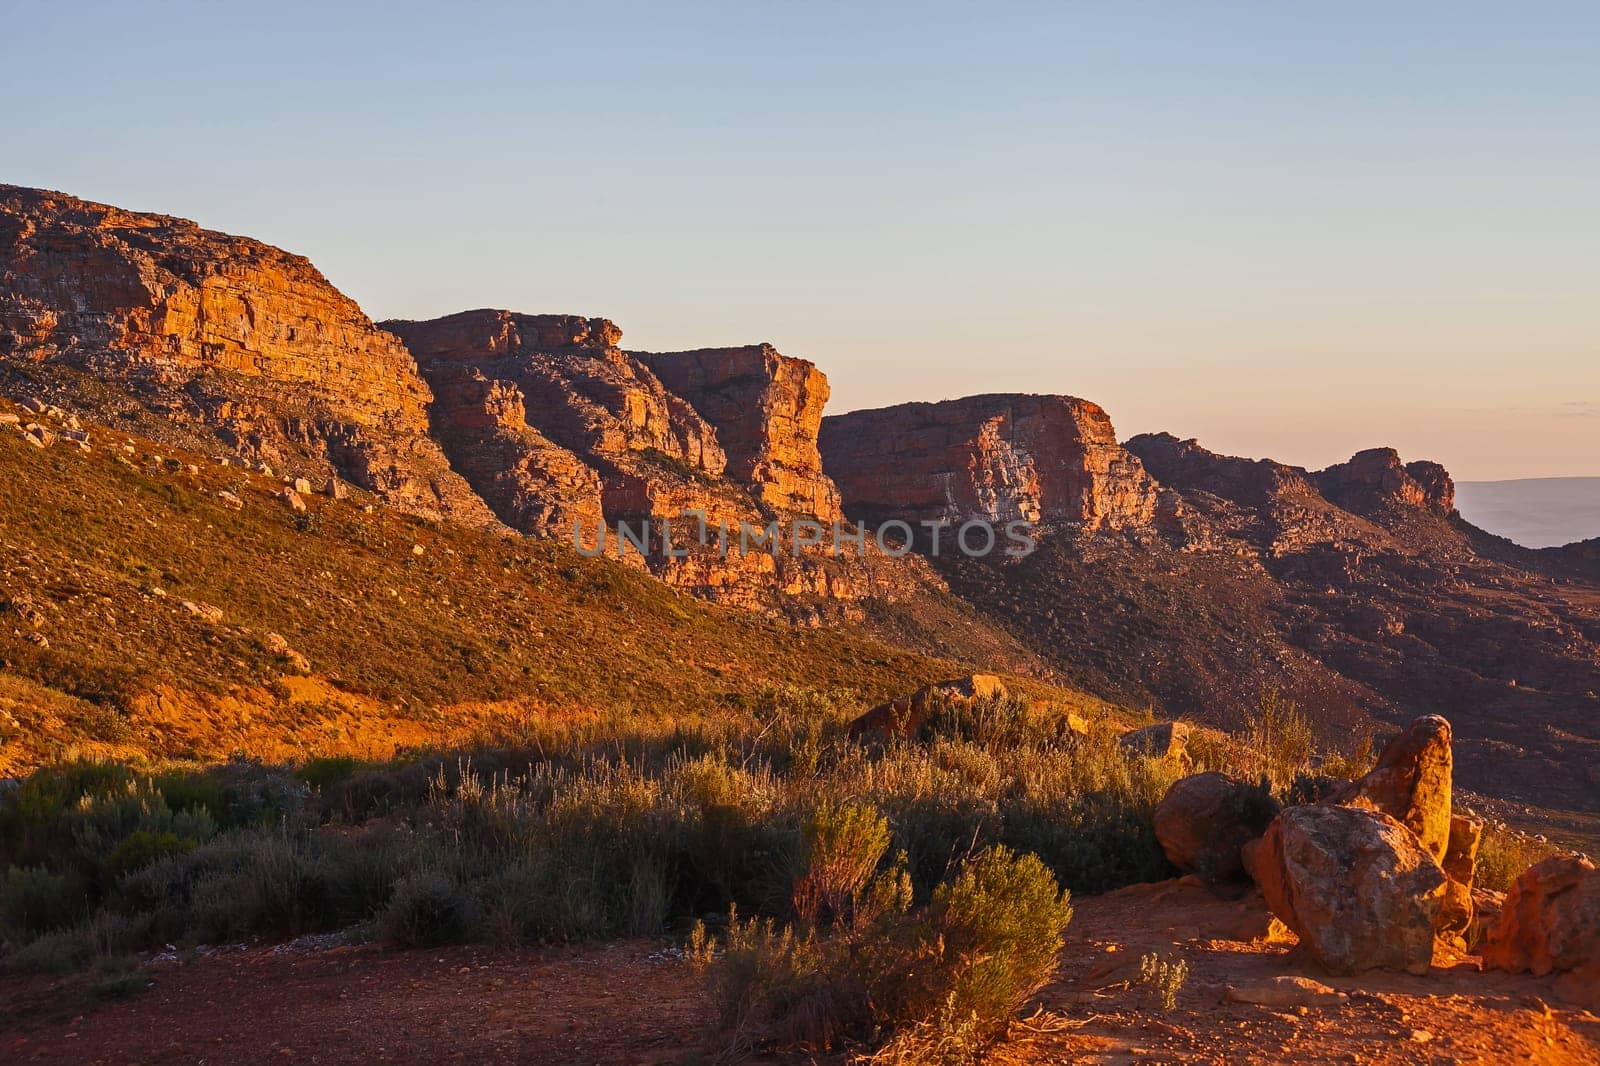 Cederberg Mountains at sunrise from the summit of Pakhuis Pass, Sederberg Wilderness Area. Western Cape South Africa